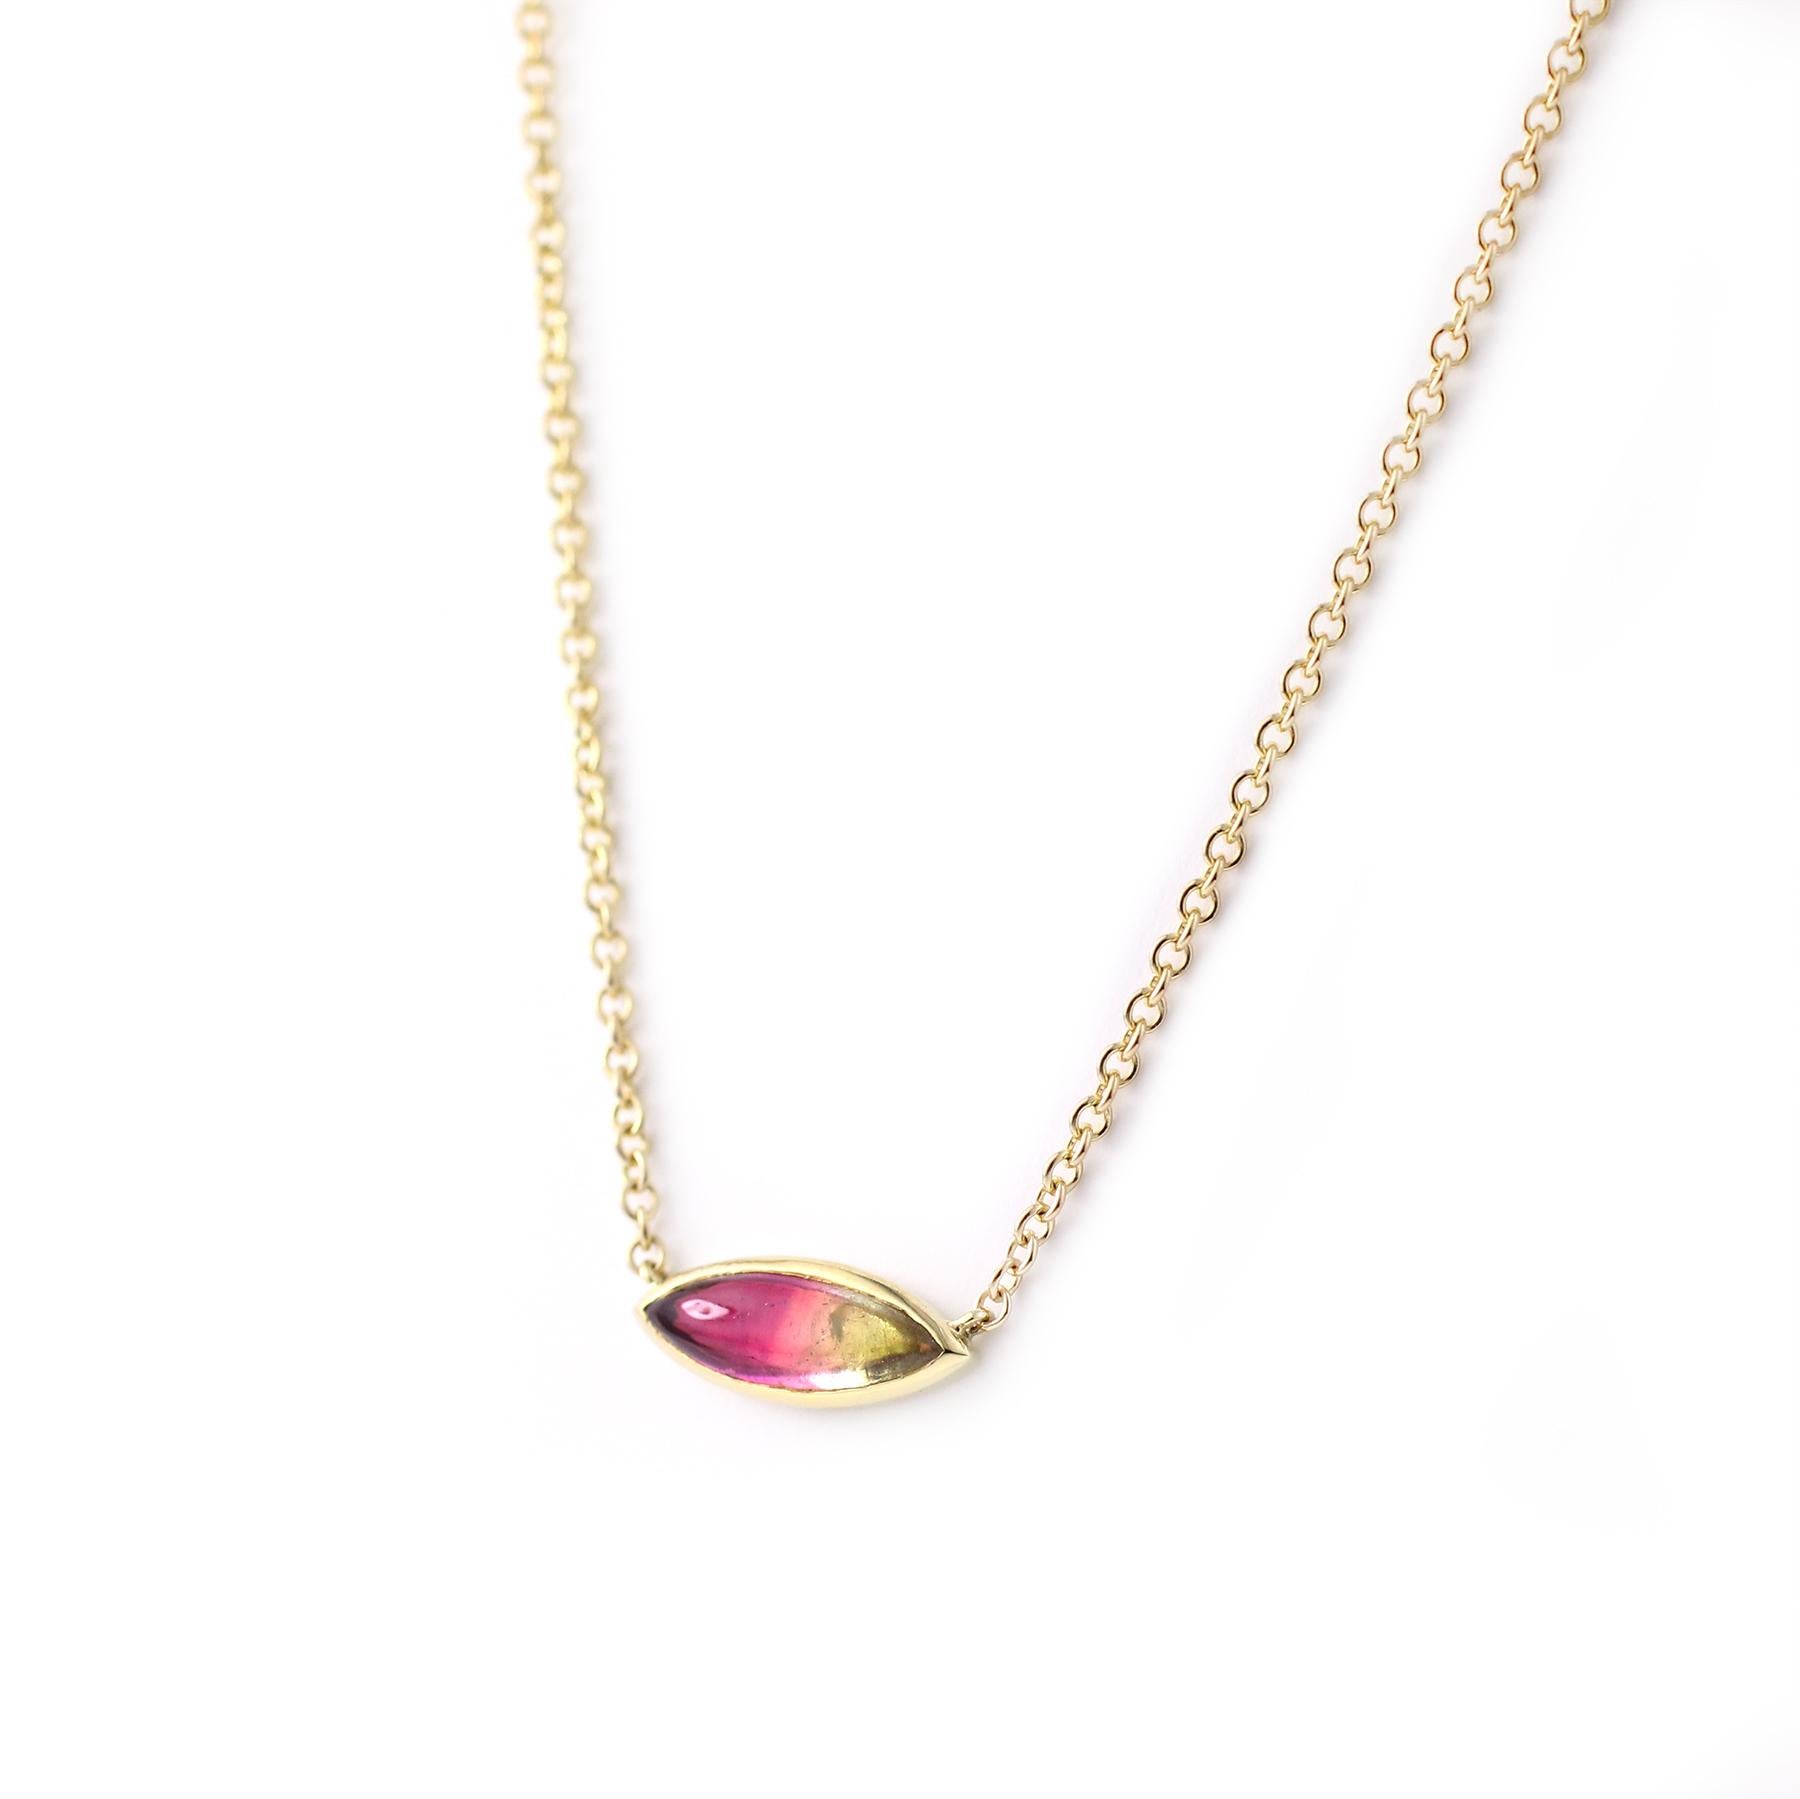 One of a Kind 18 Kt Gold and Watermelon Tourmaline Necklace 

Watermelon Tourmalines have a natural gradient that goes from Pink to Green, making it quite the charming stone.  This juicy marquise-shaped cabochon is set in an 18 Kt Gold bezel and